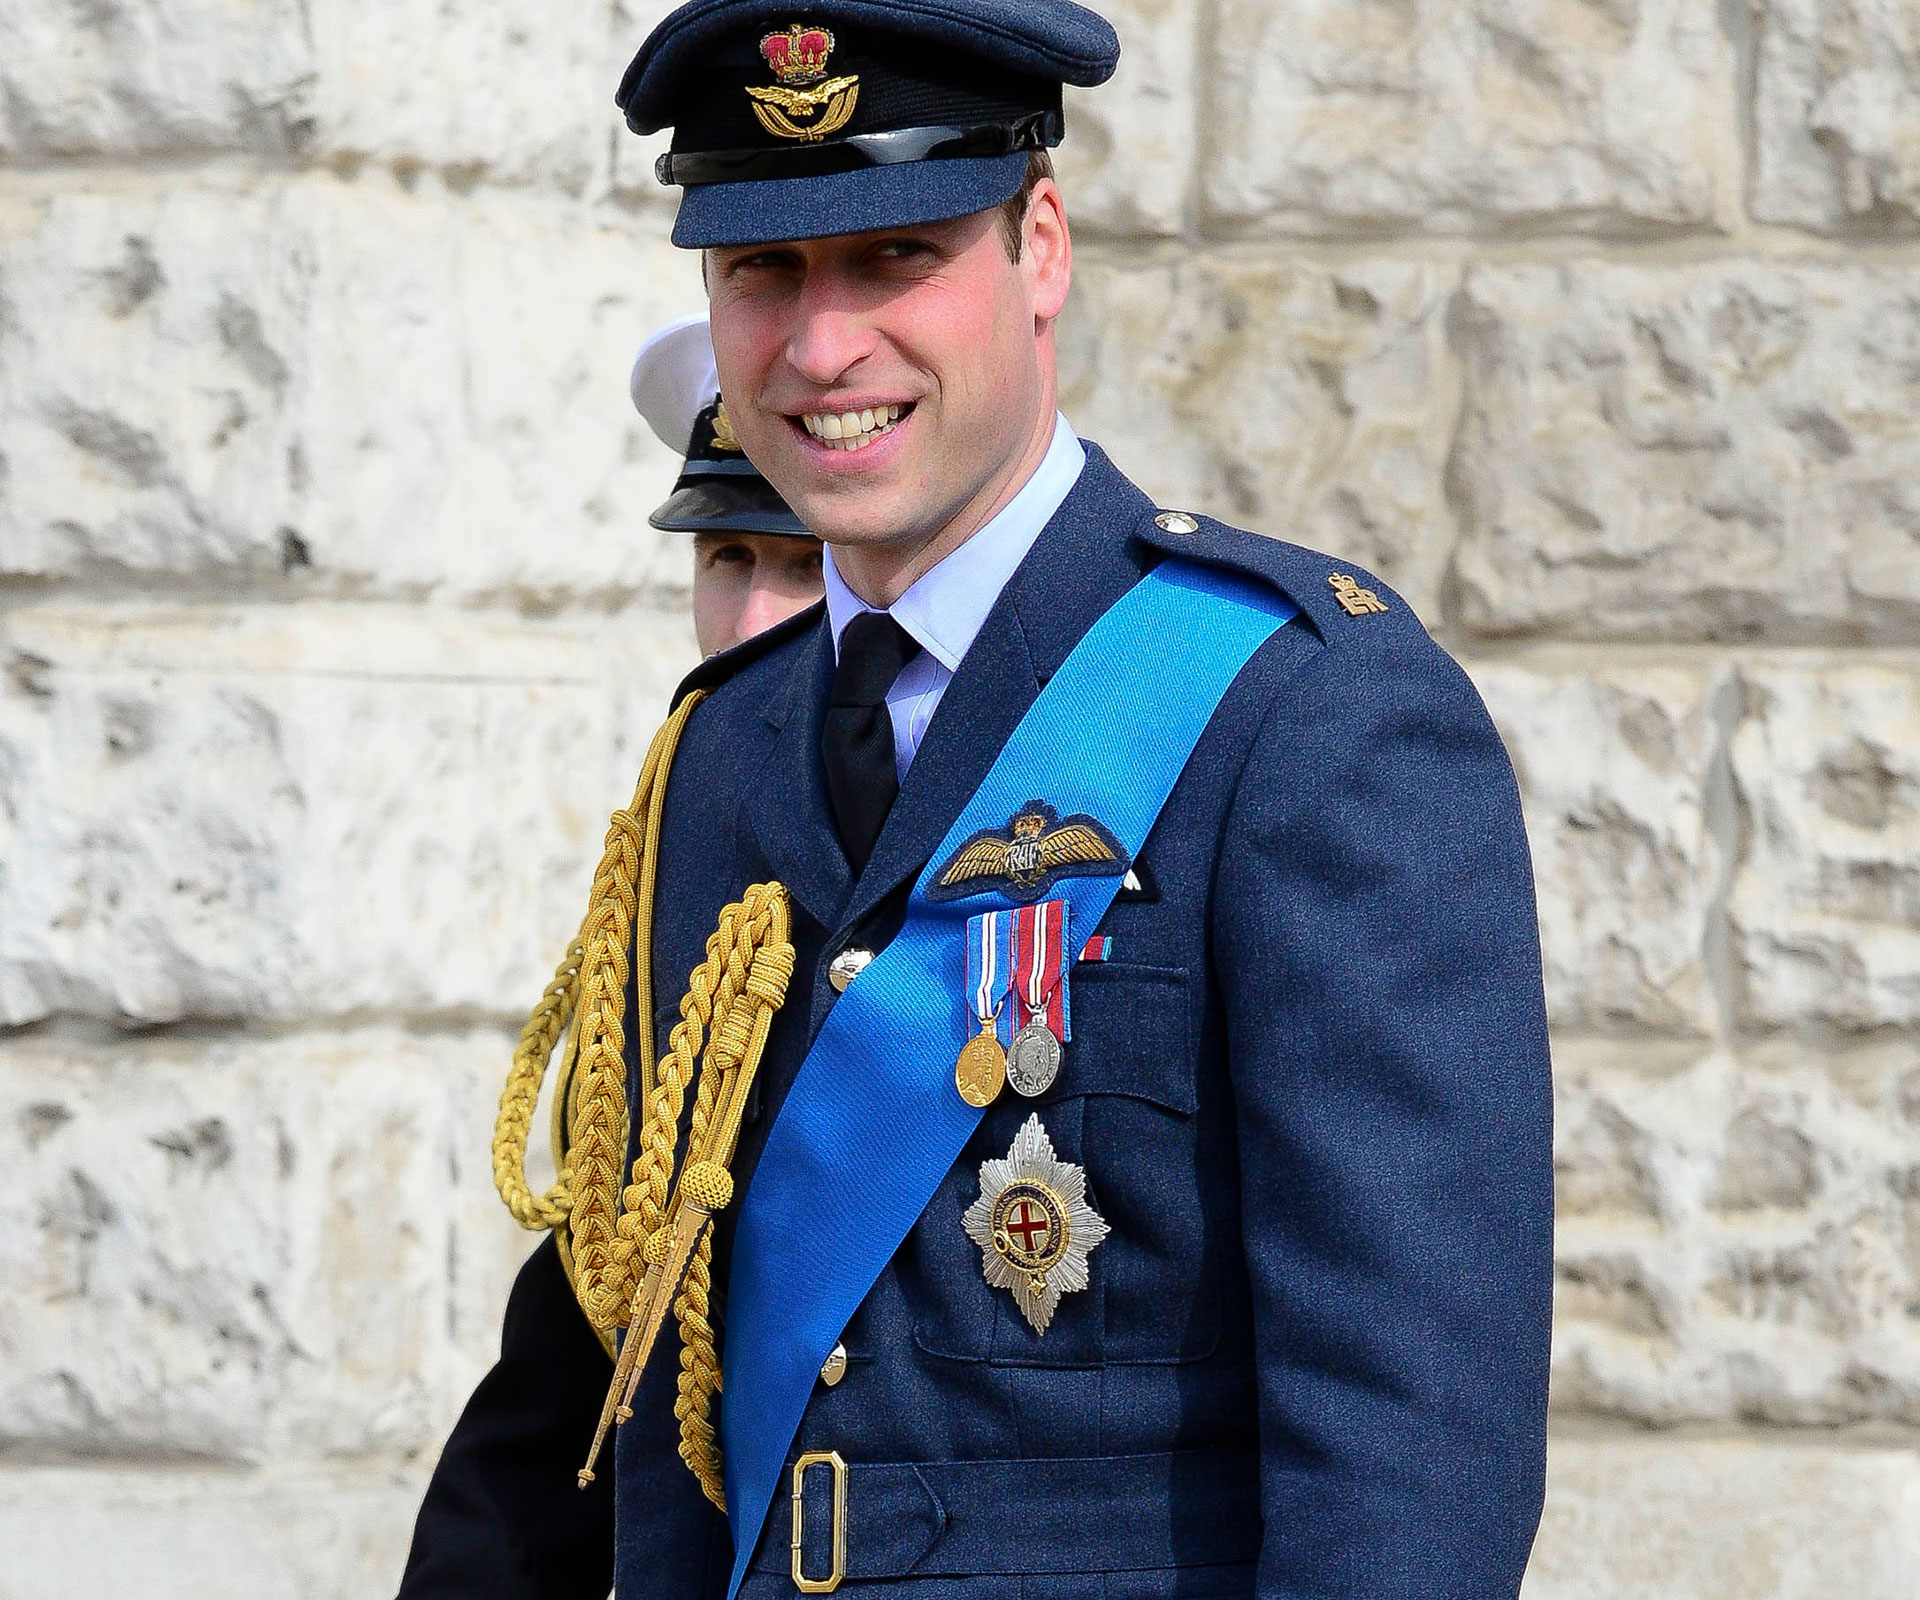 Prince William to become King William soon?